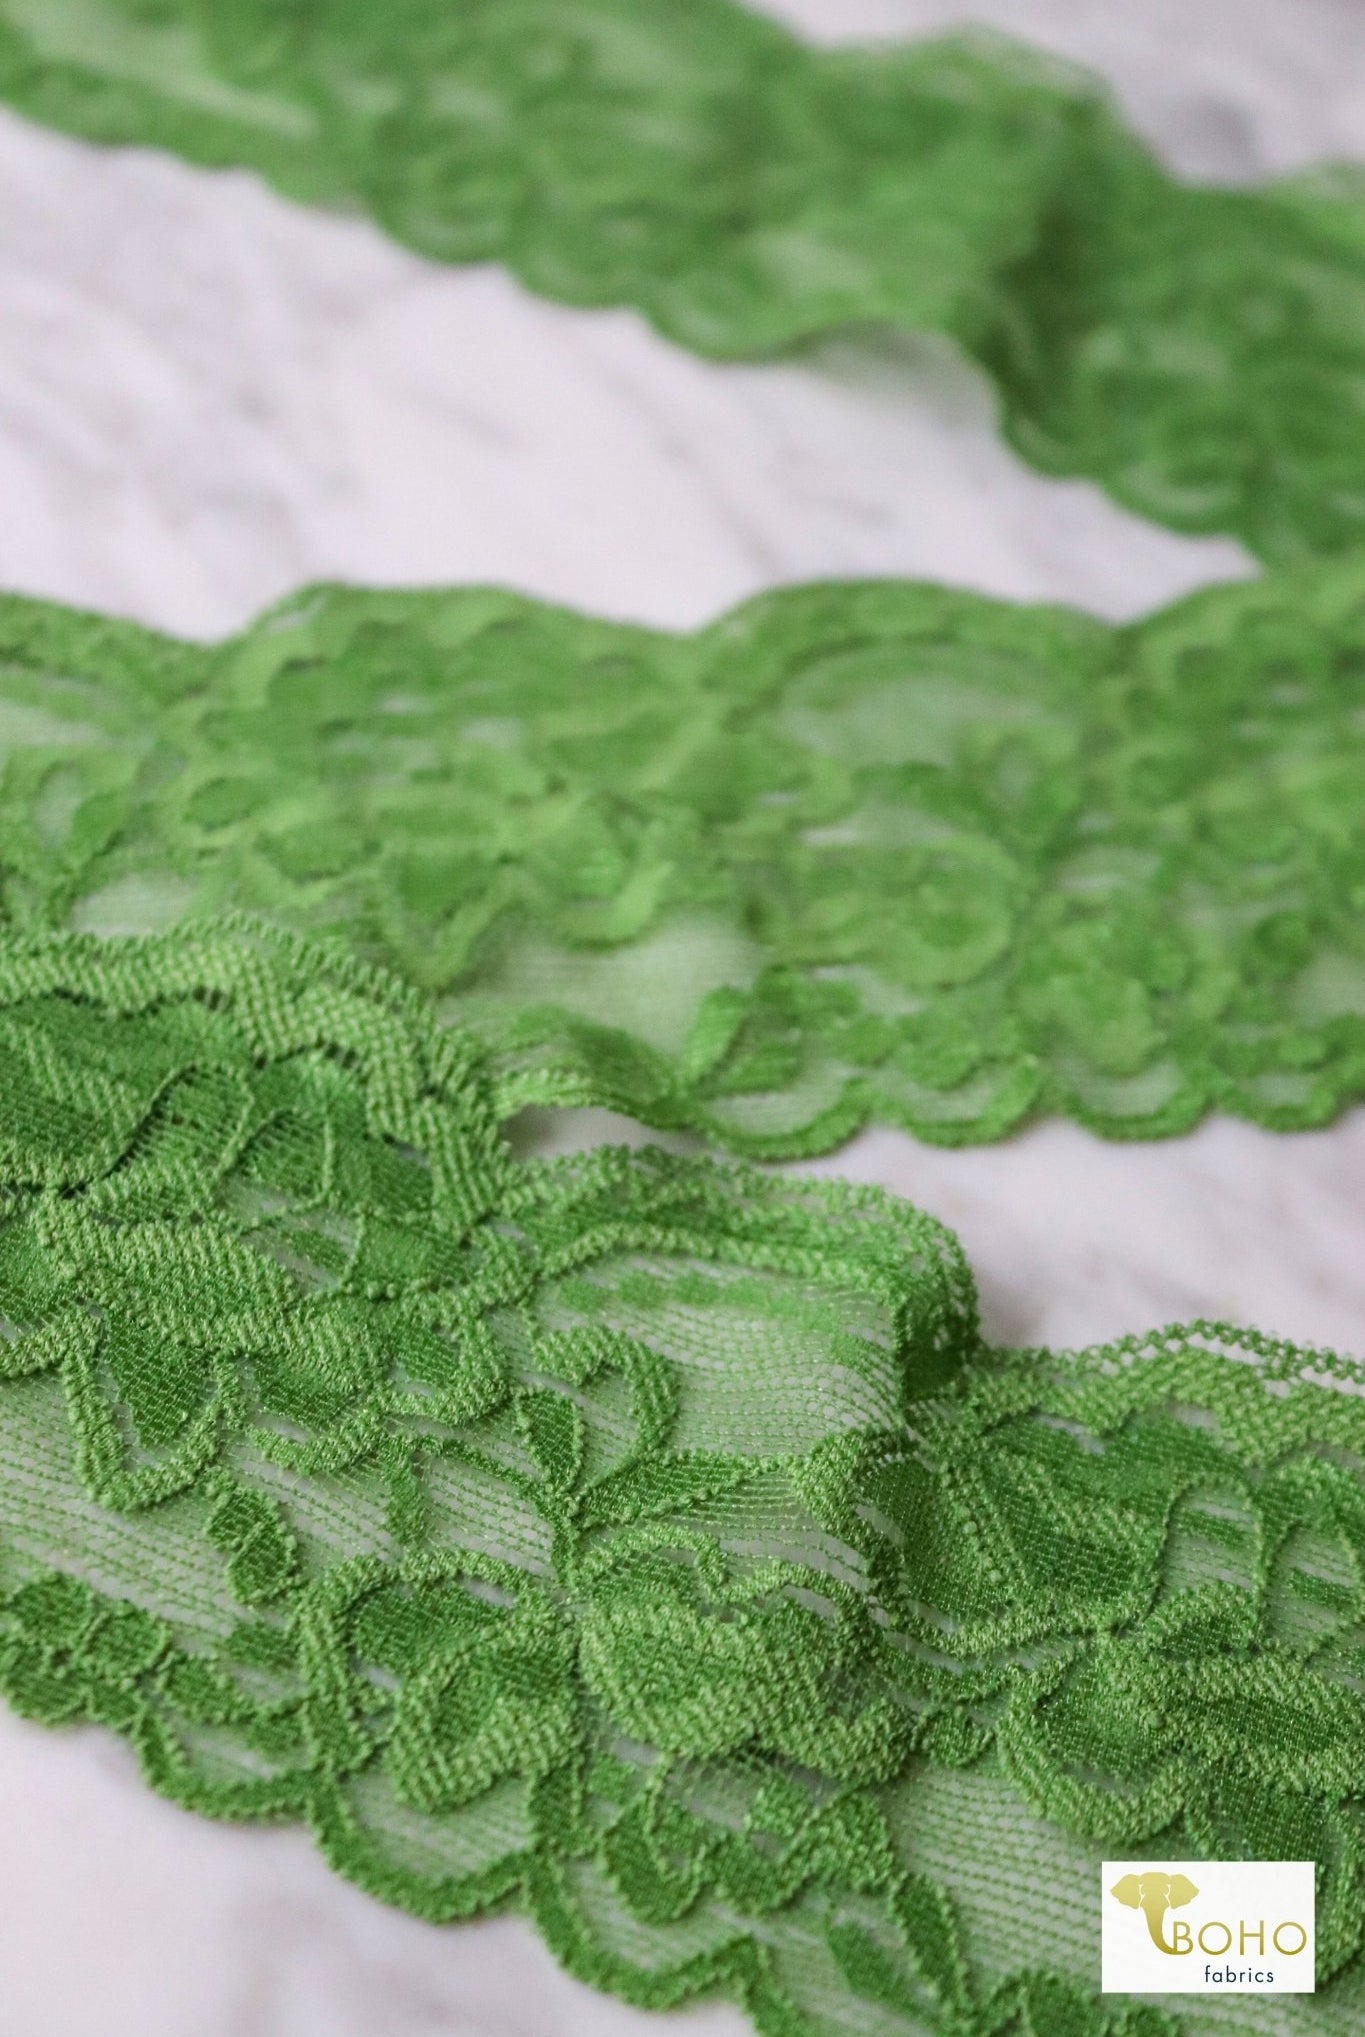 3.25" Green Florals, Stretch Lace Trim SOLD PER PACKAGE OF 3 YARDS. - Boho Fabrics